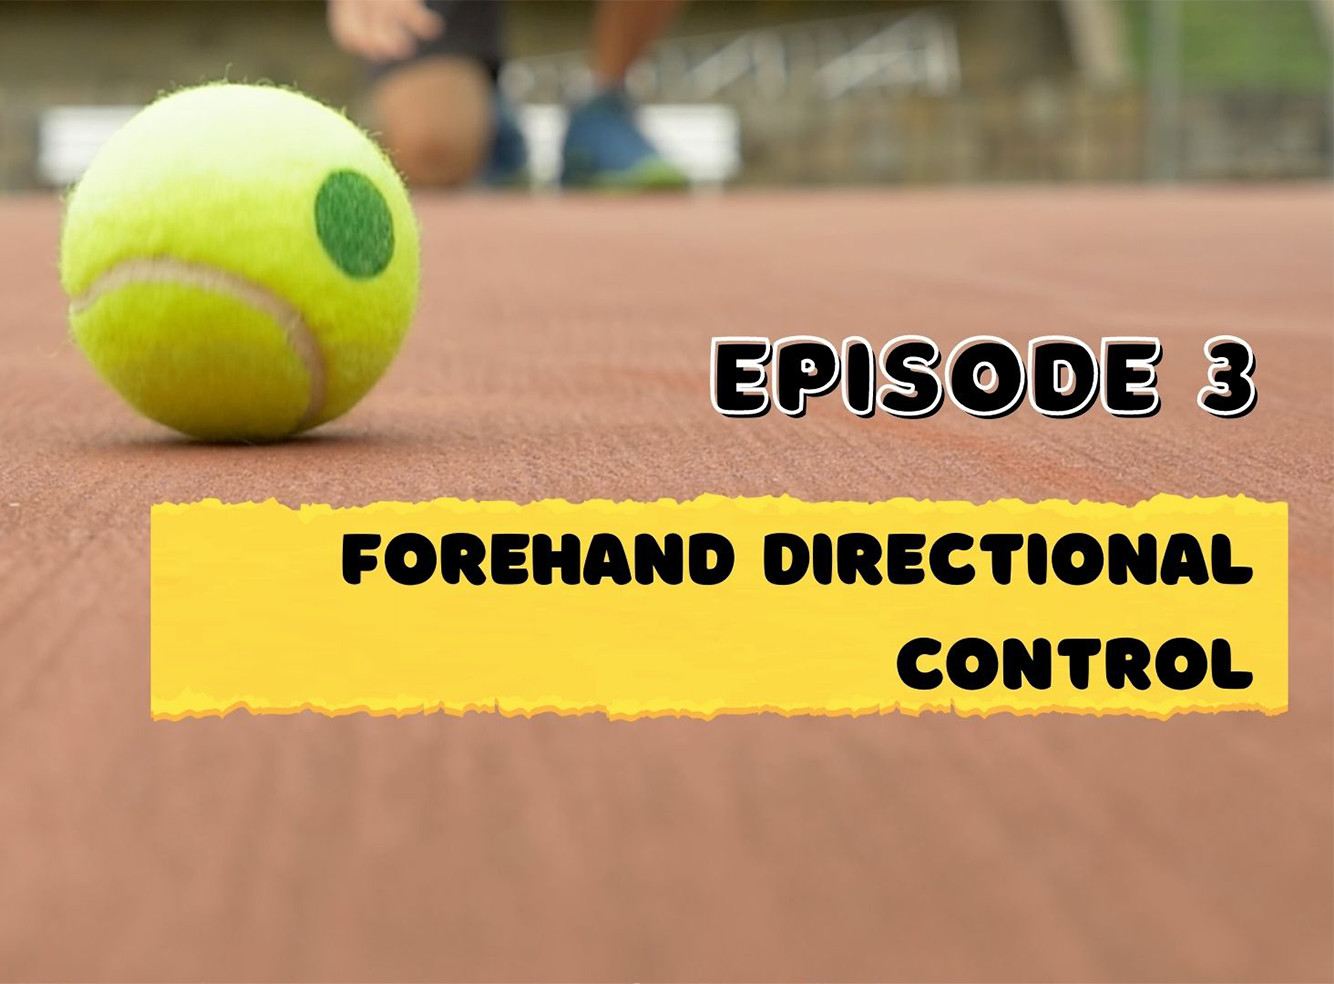 Ep 3 - Forehand directional control